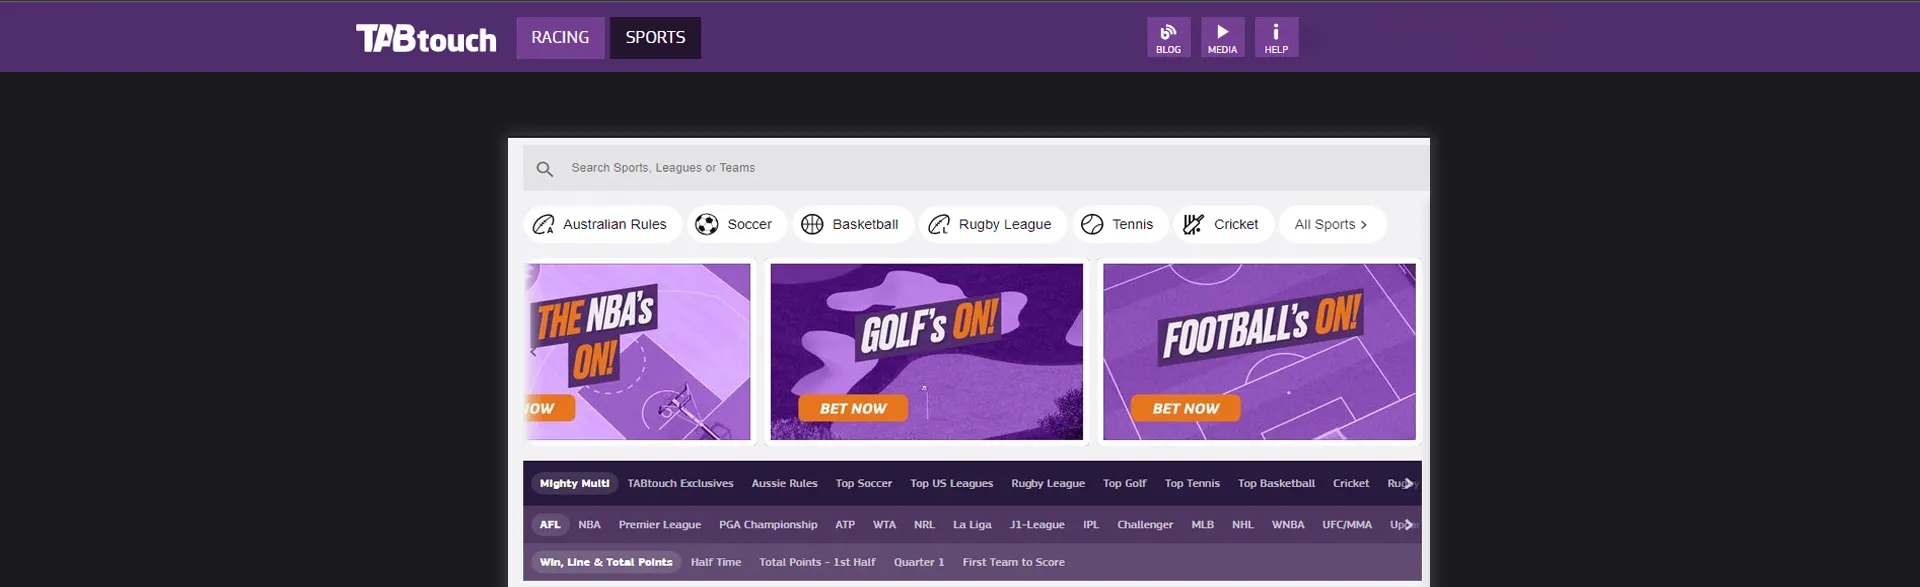 TABtouch desktop page displaying sports betting options.